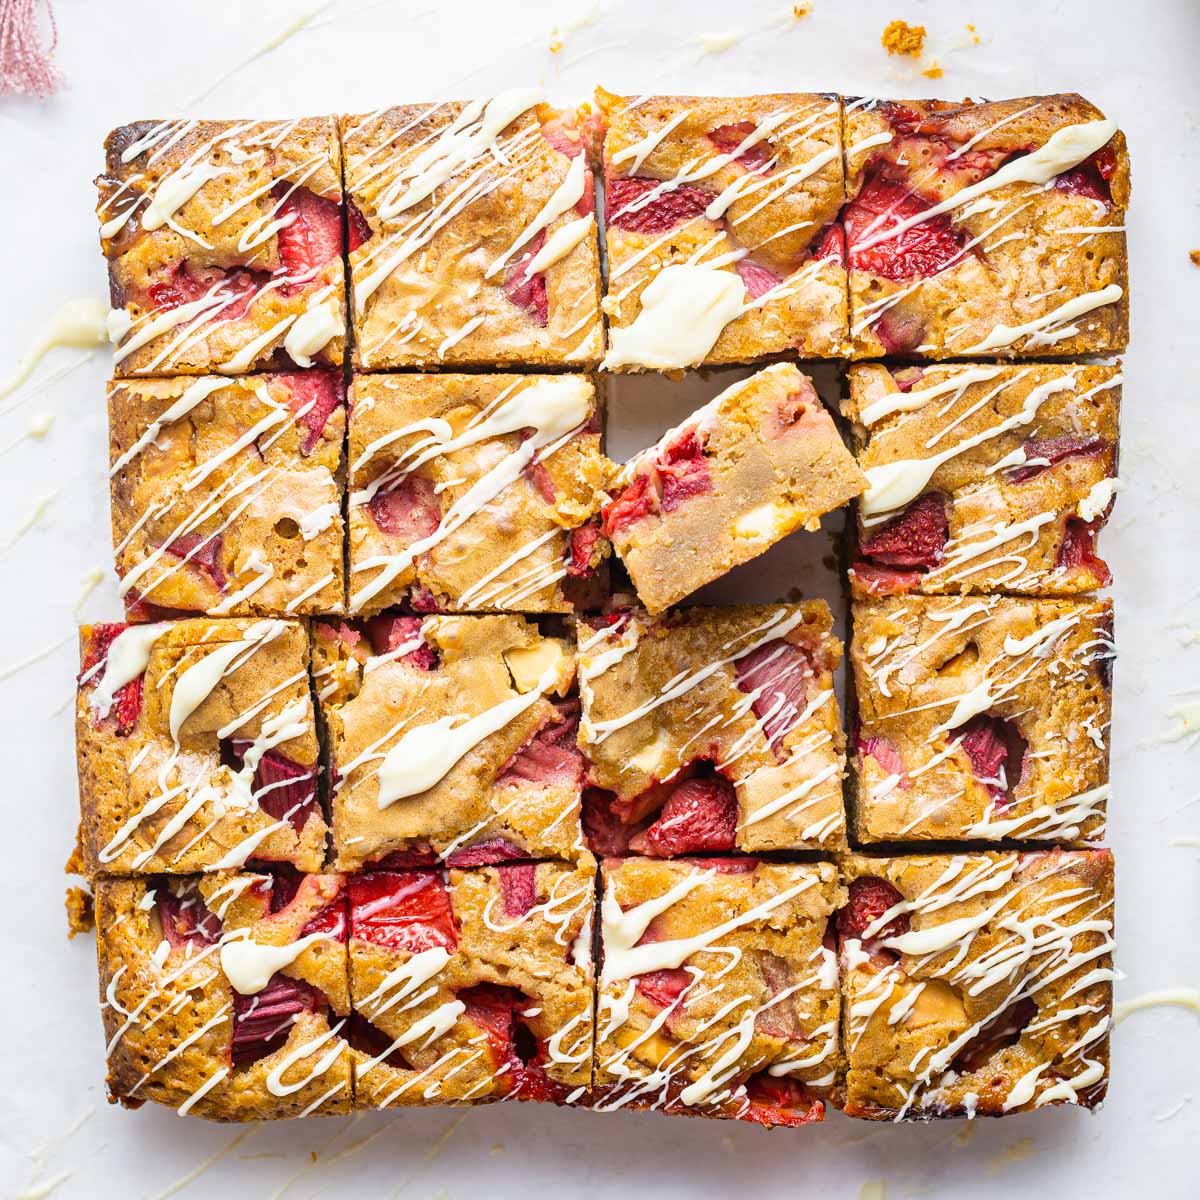 baked strawberry rhubarb blondies with white chocolate drizzled over the top